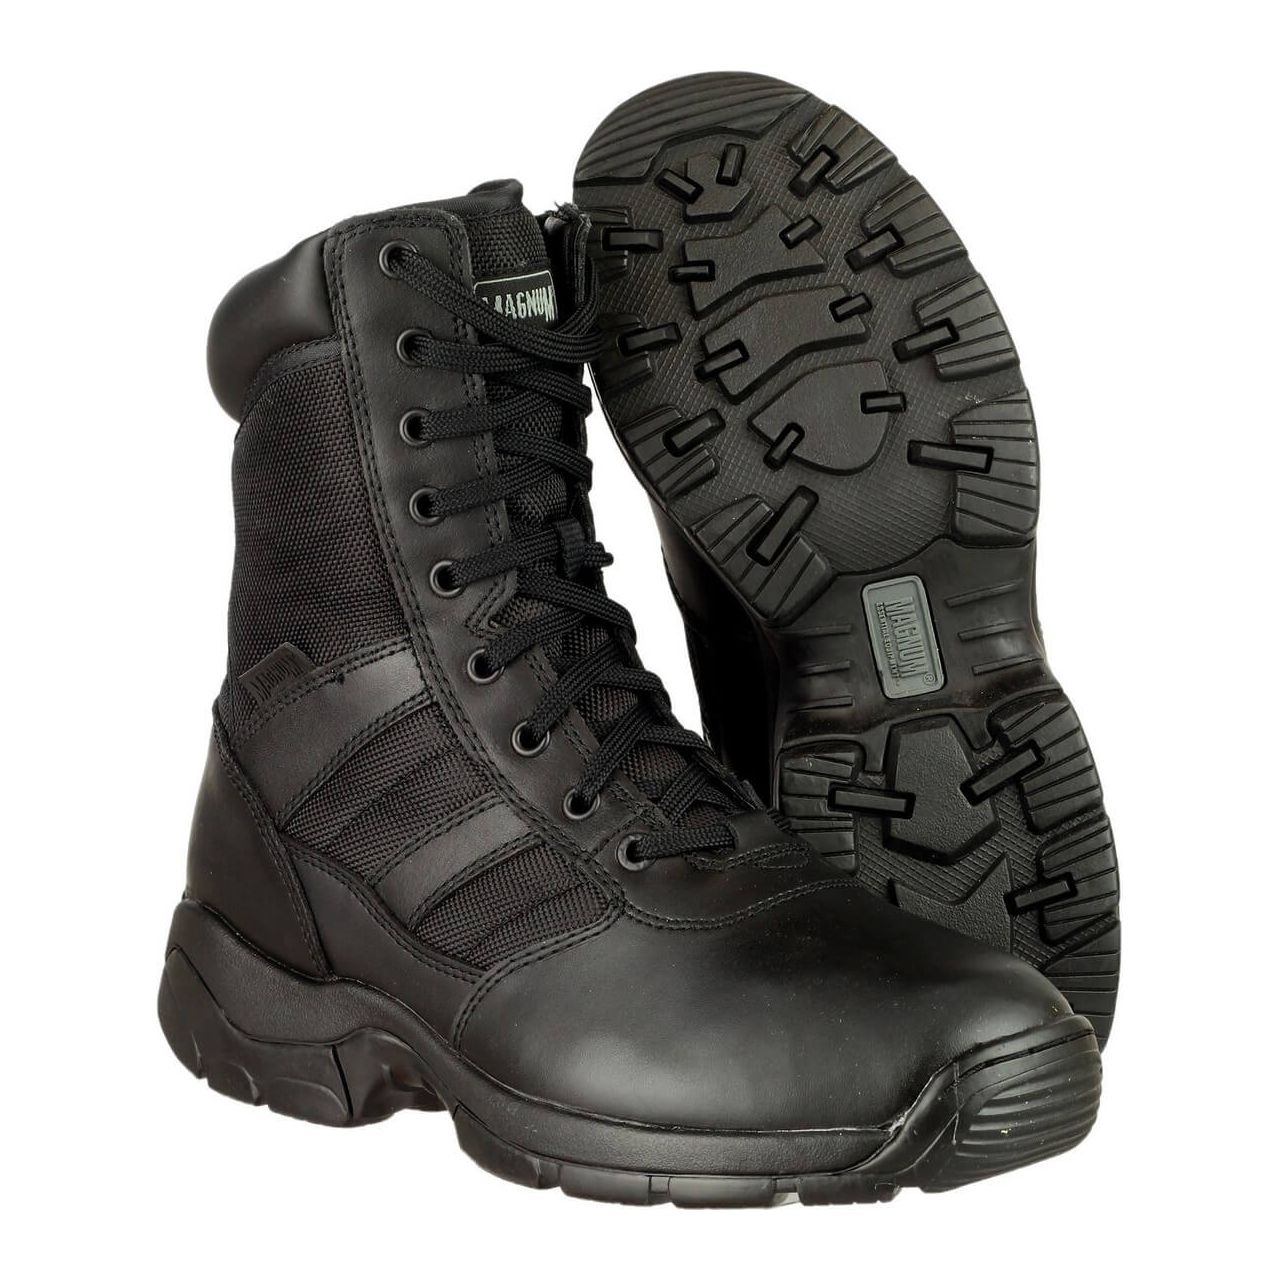 Magnum Panther 8" Lace-up Boots"-Black-3